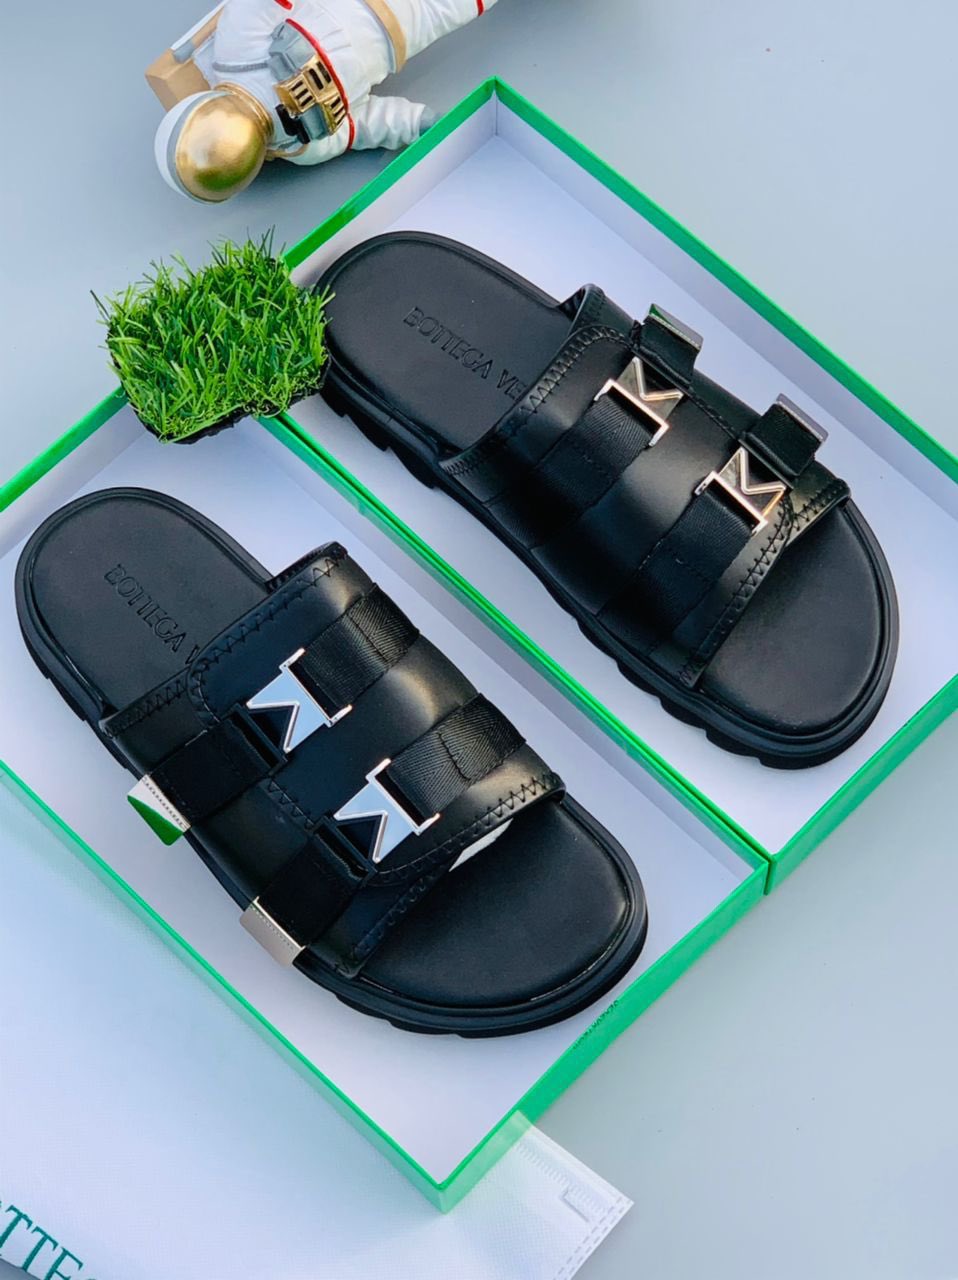 MiddleMan Nigeria  Social Media Agency on X: Bottega Veneta Wavy Sole  Slippers 40 to 45 #28,000 Payment On Delivery Available For Lagos Orders   / X